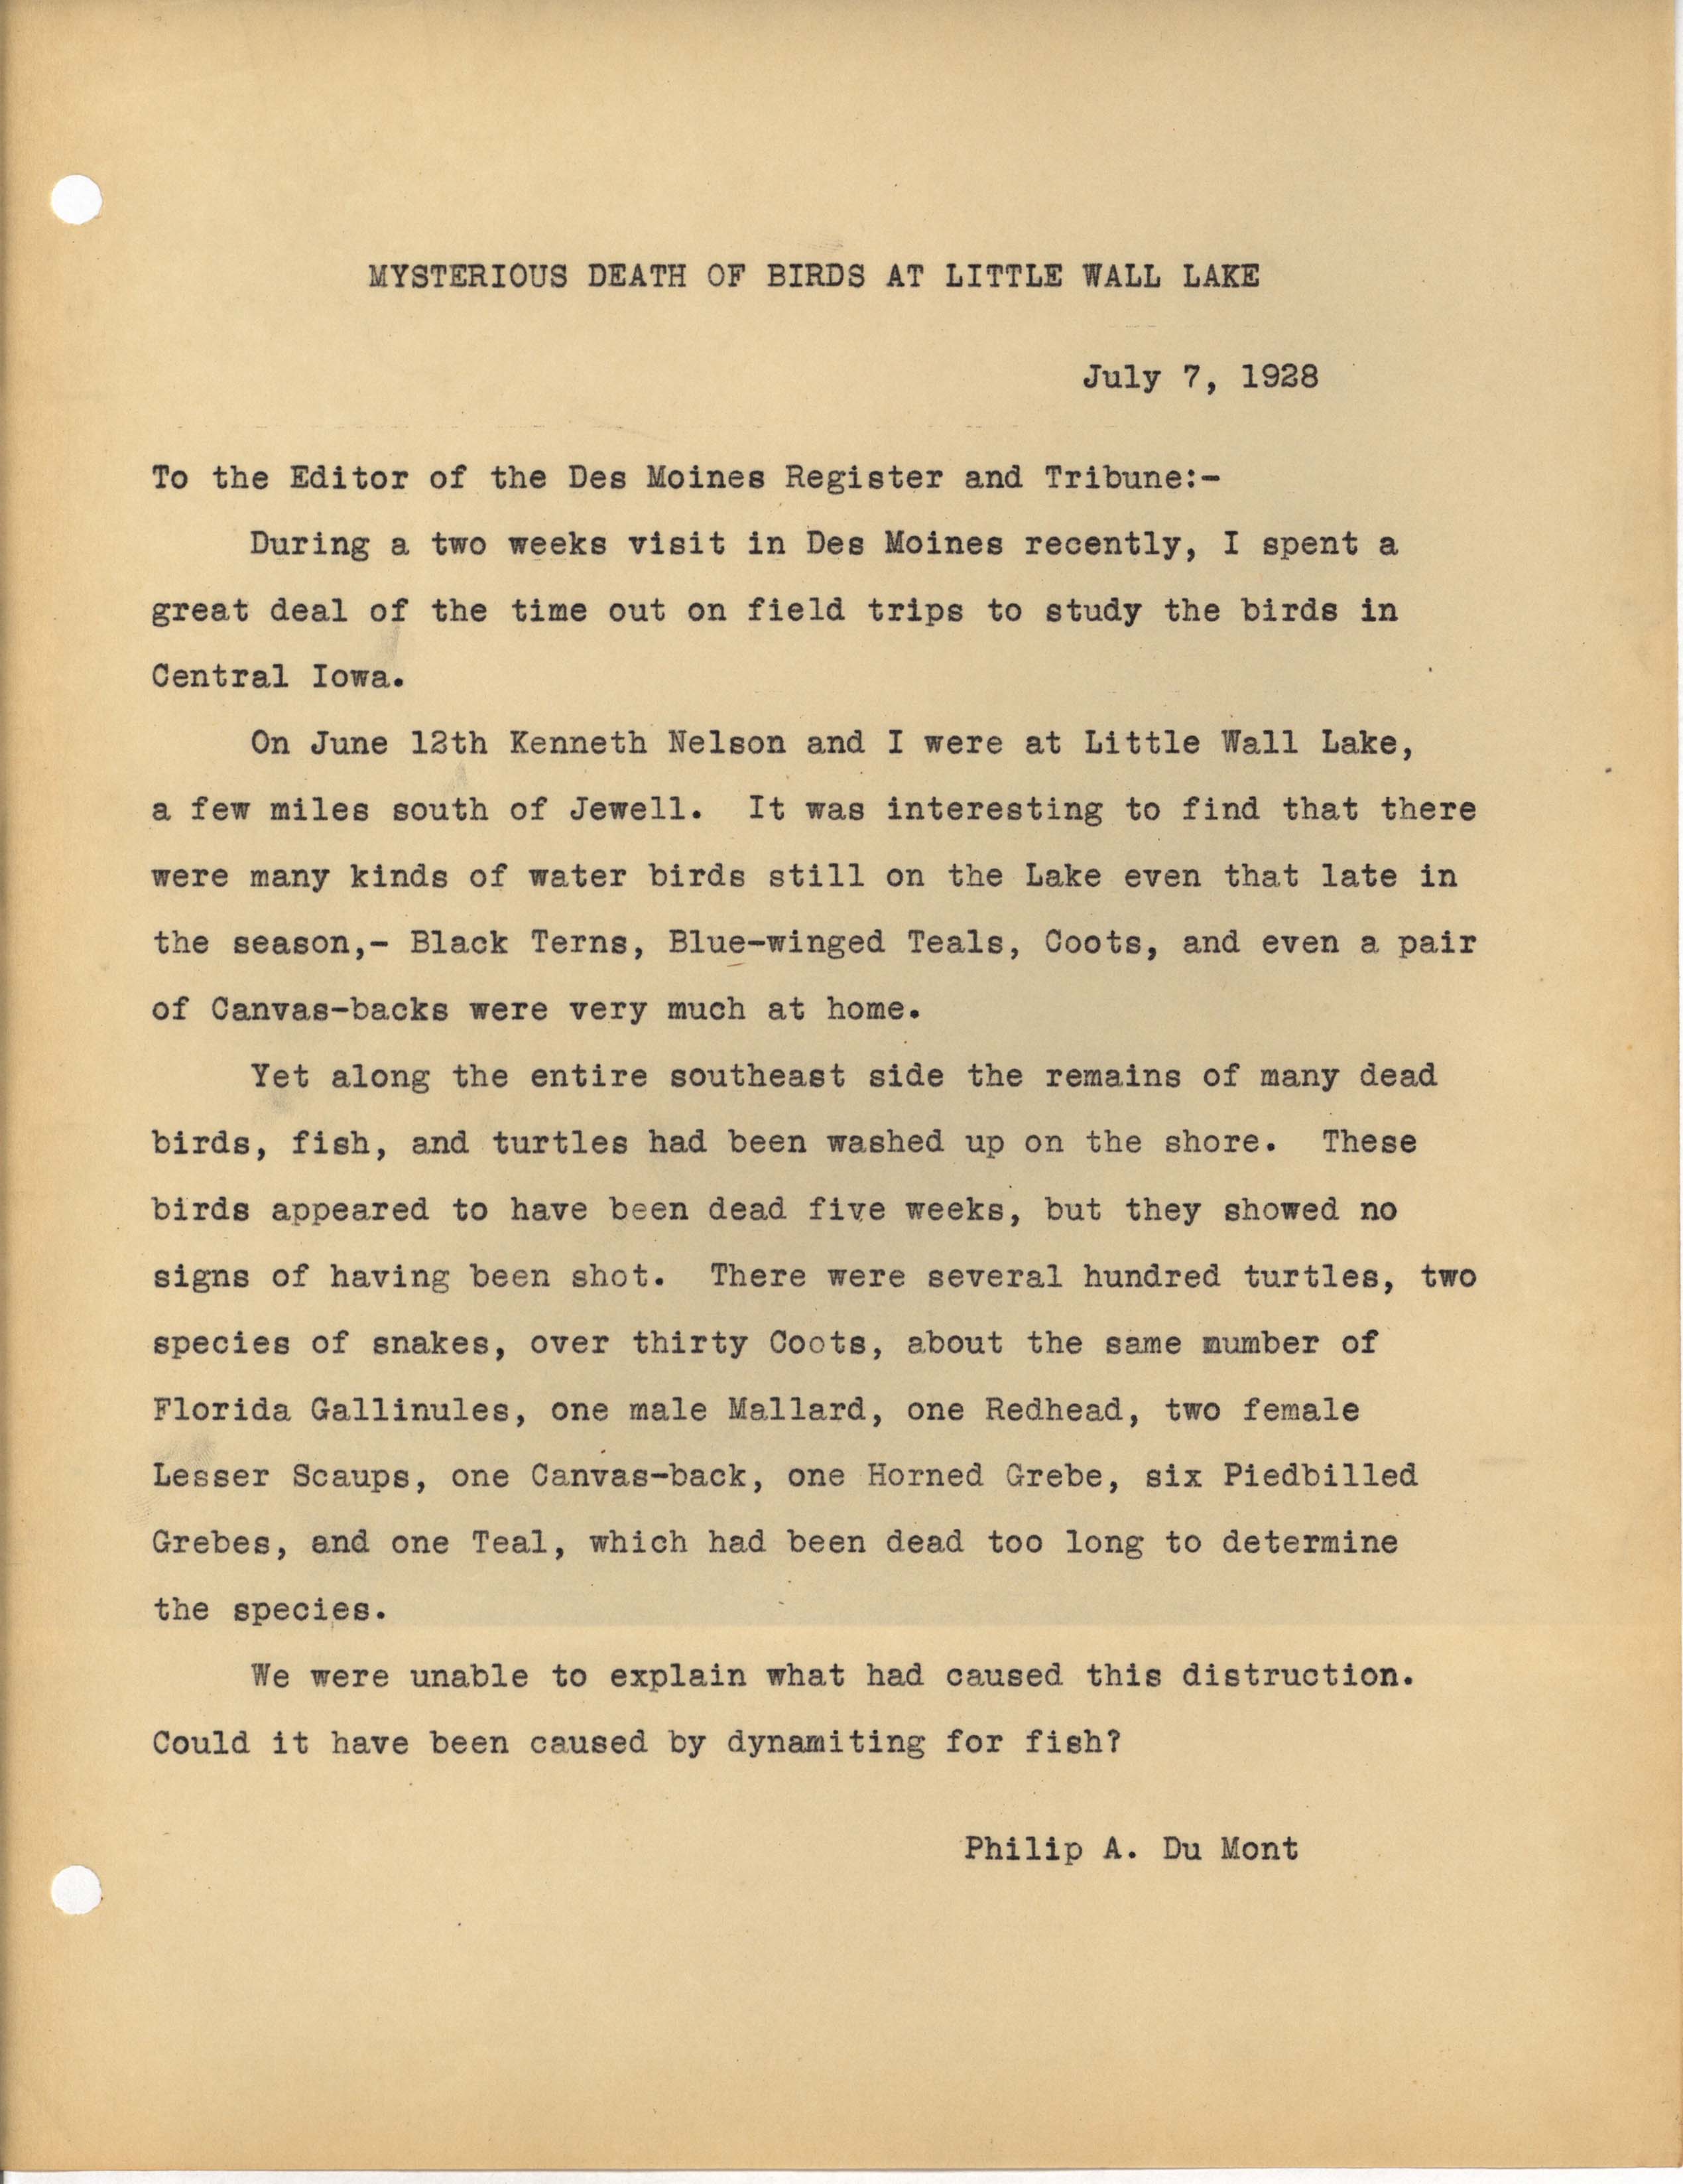 Philip DuMont letter to the editor of the Des Moines Register and Tribune regarding dead birds at Little Wall Lake, July 7, 1928